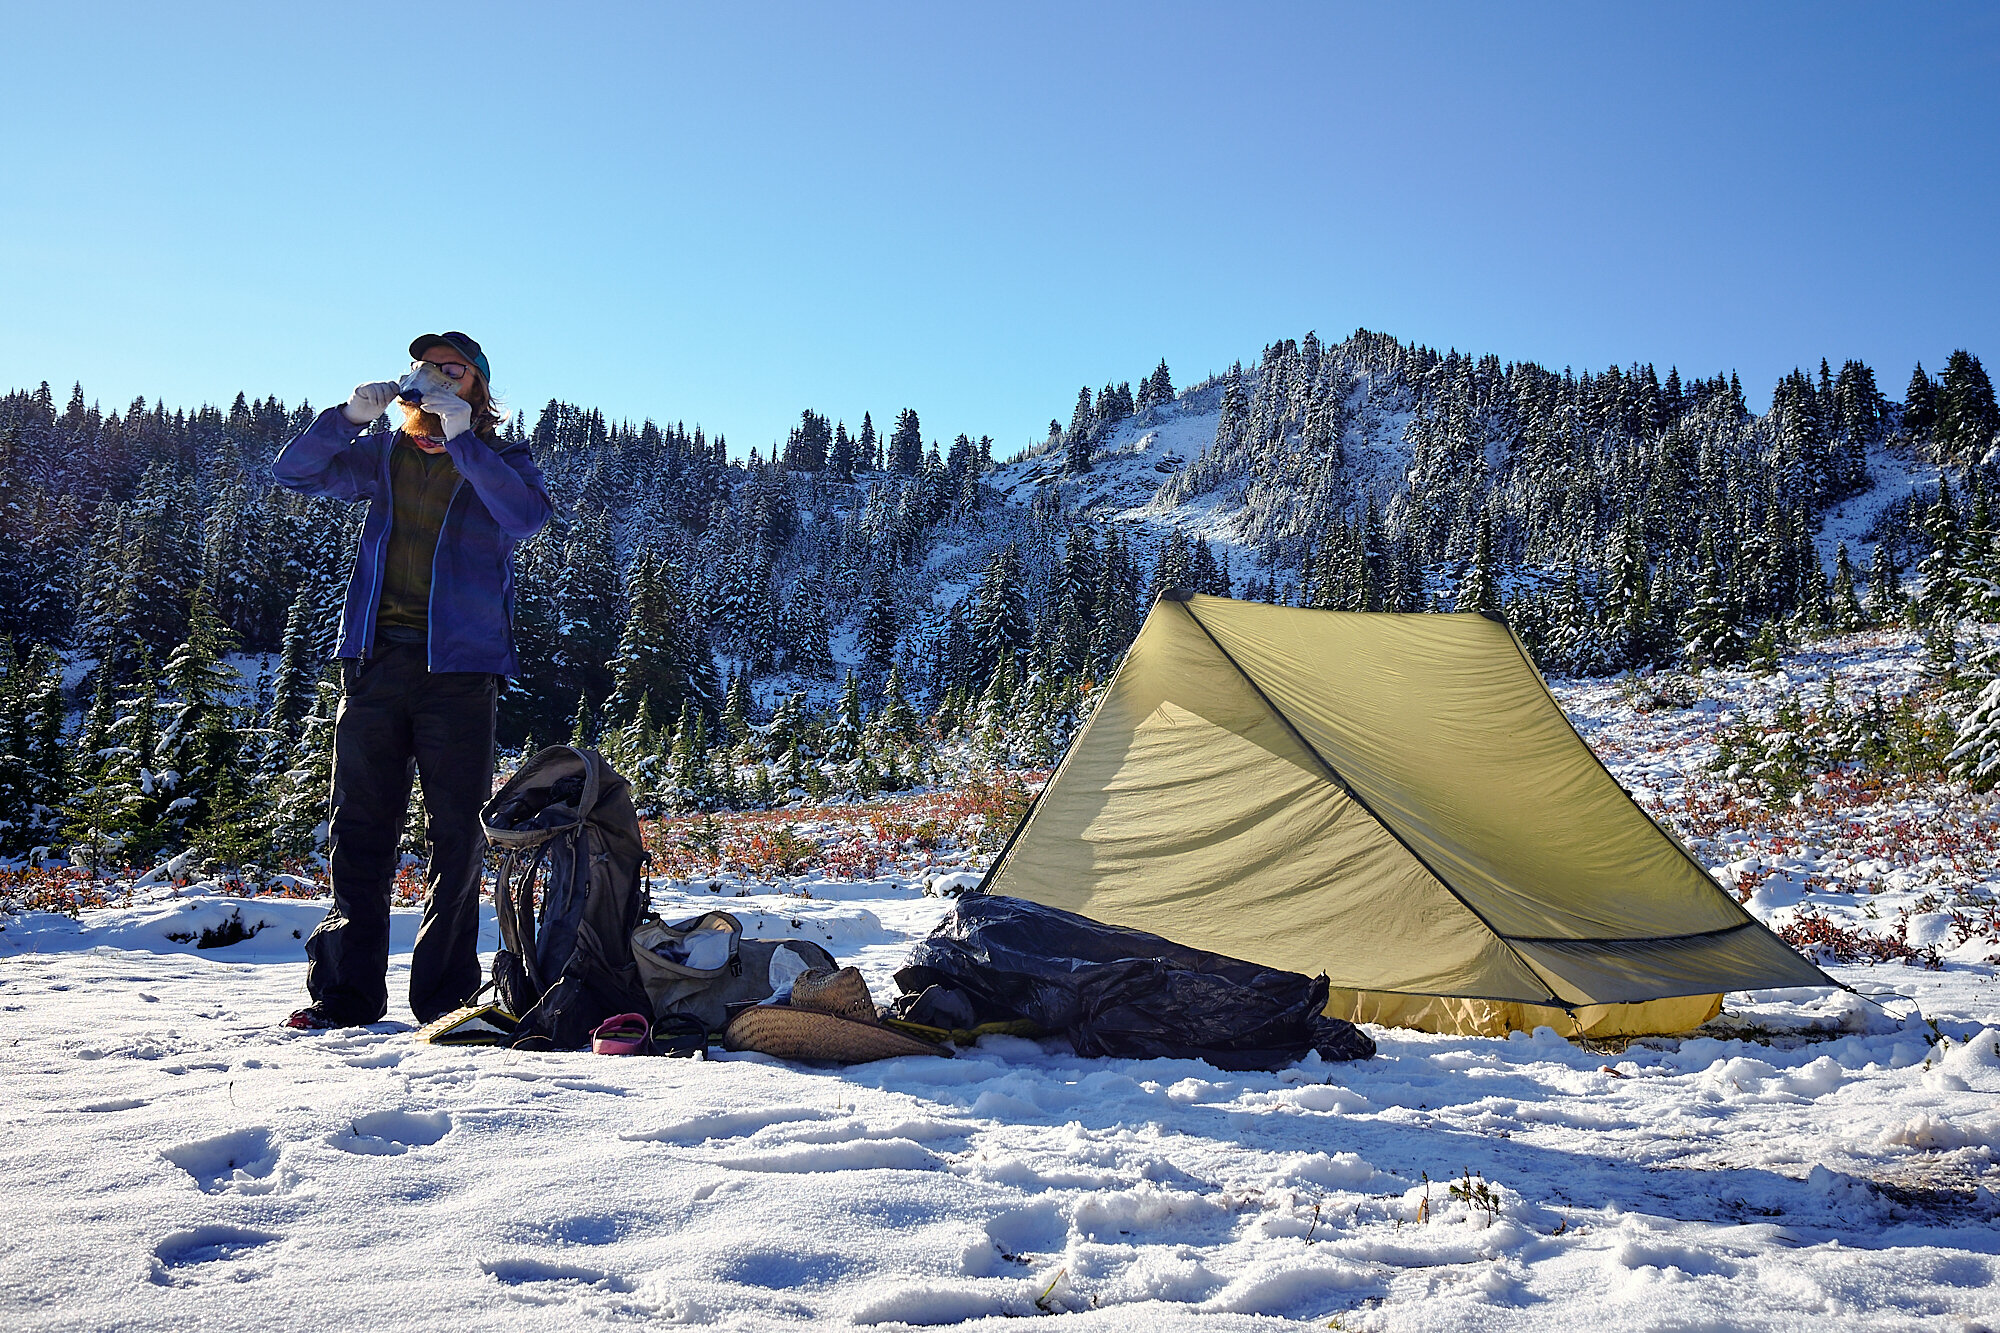  Lebowski eats breakfast on a particularly chilly morning beneath Grizzly Peak. | 10/1/19 Mile 2,479.8, 5,582' 